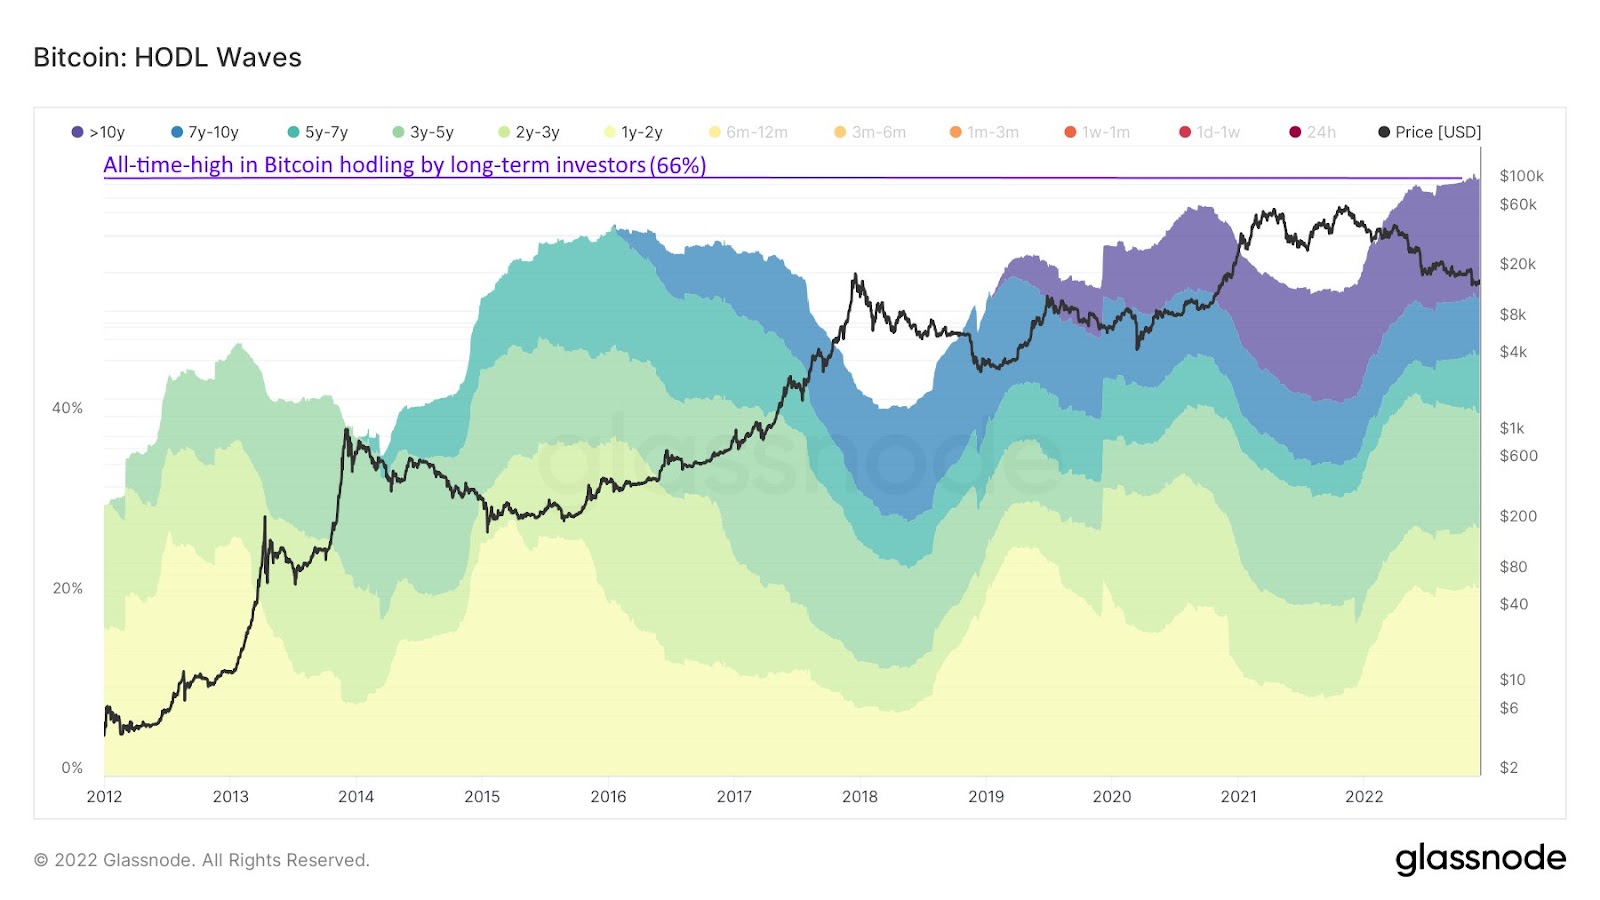 A chart showing the rate of Bitcoin hodling by long term investors from 2012 through 2022.